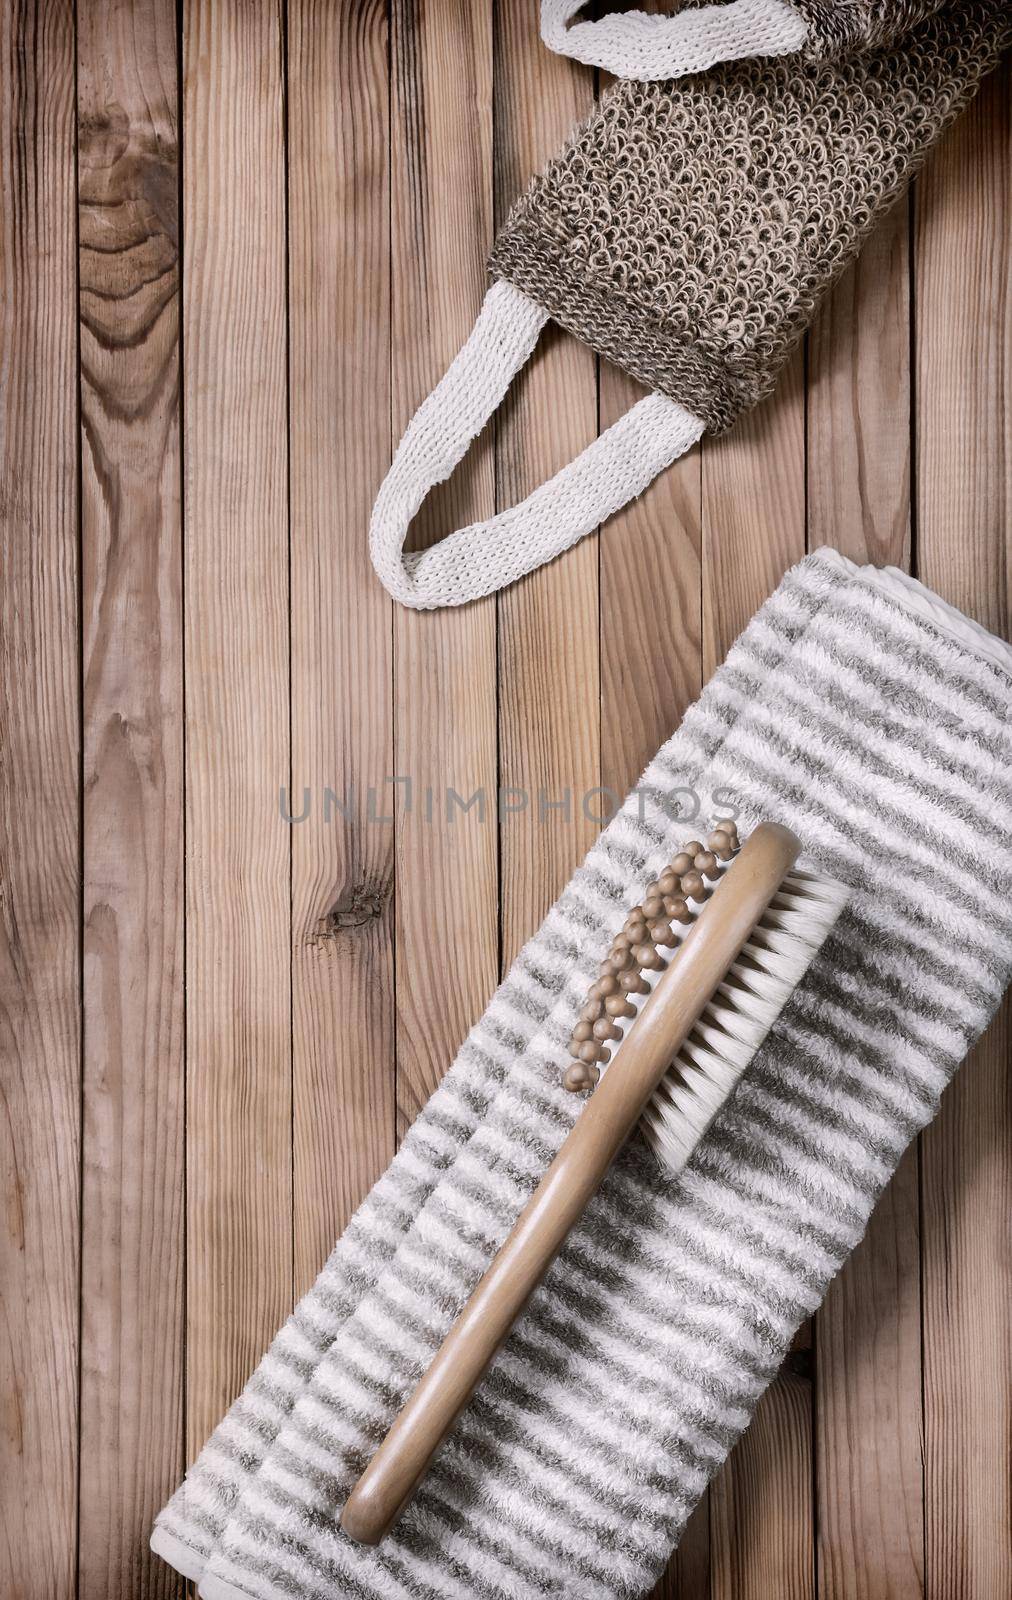 Accessories for visiting the bath or sauna on a wooden background: towel, washcloth, massage brush. Top view with copy space. Flat lay